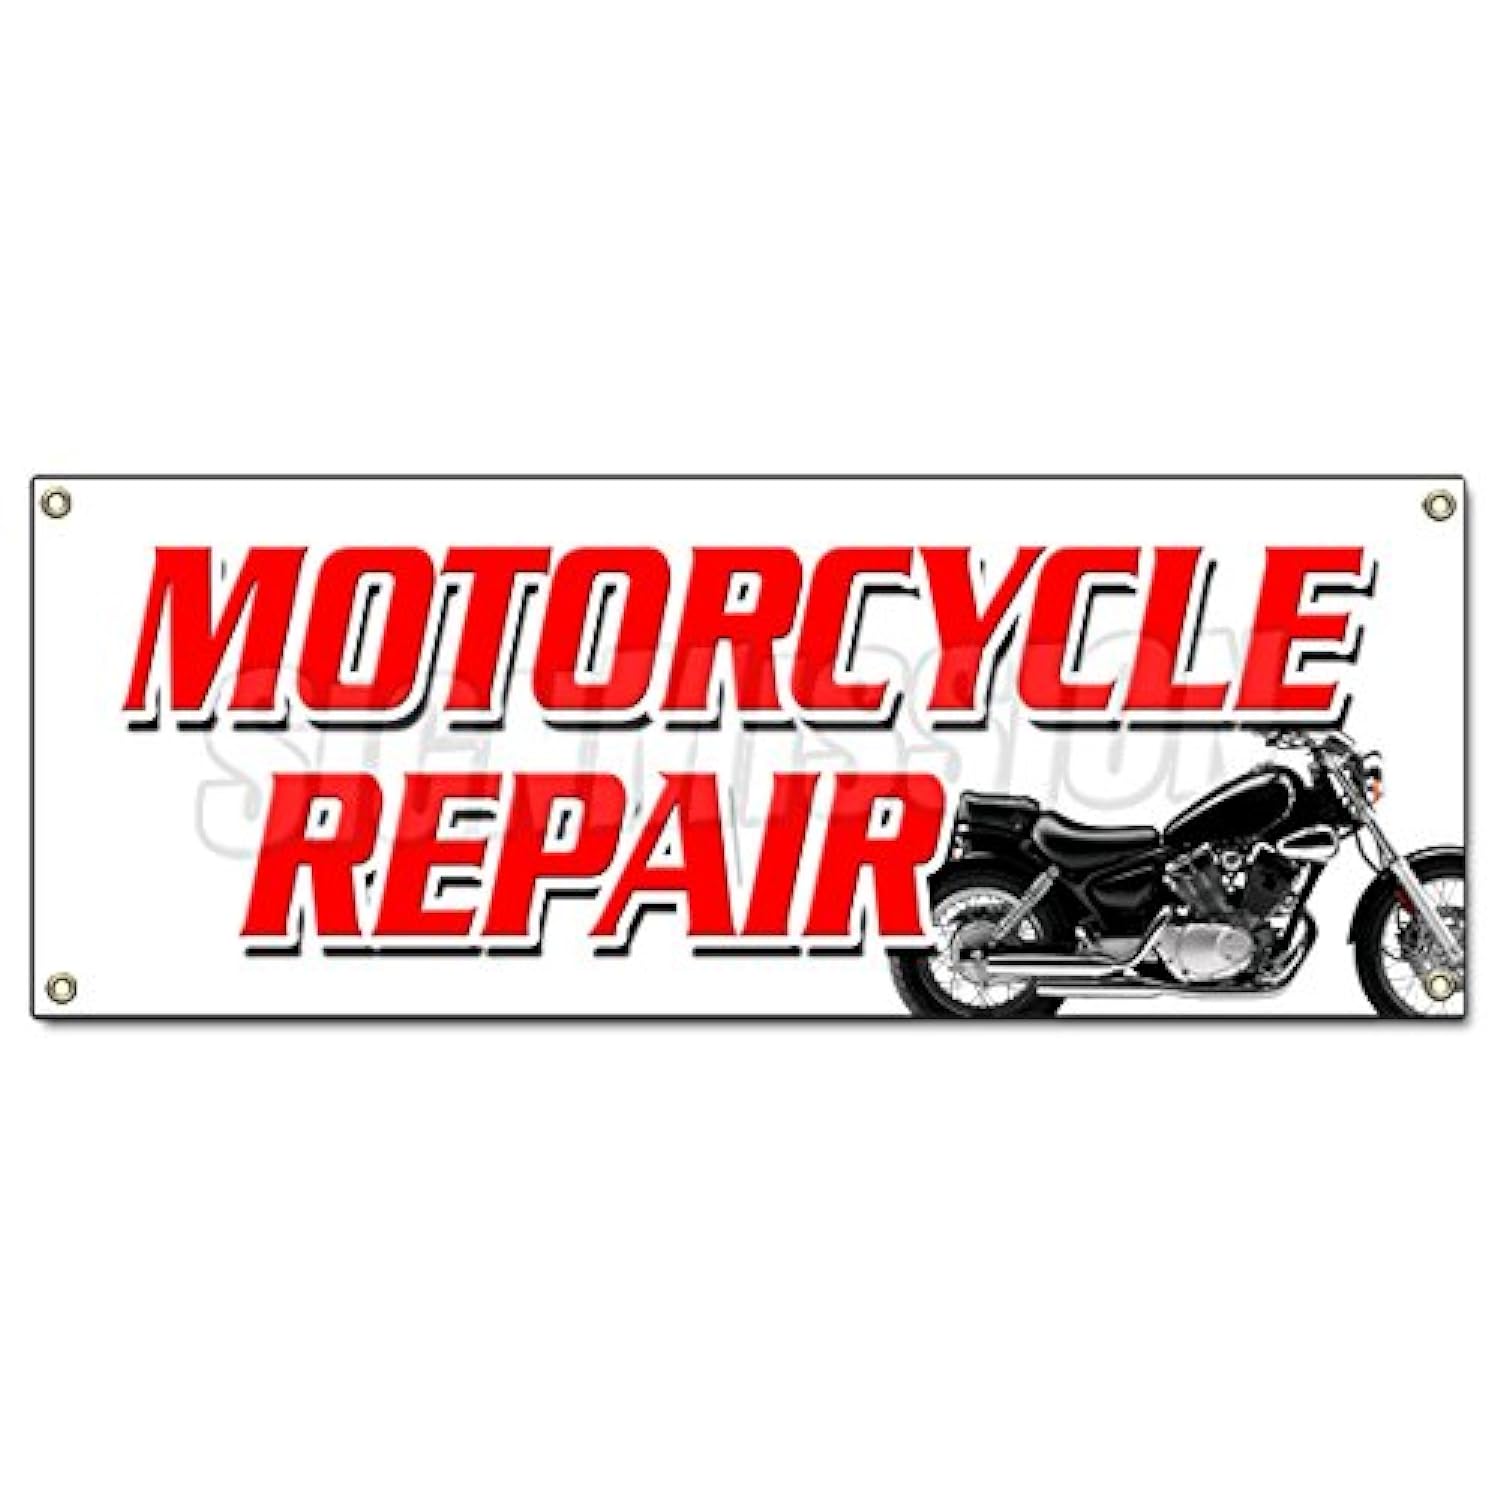 SignMission Motorcycle Repair Banner Sign tech Service Cycle Repair All Brands Sale